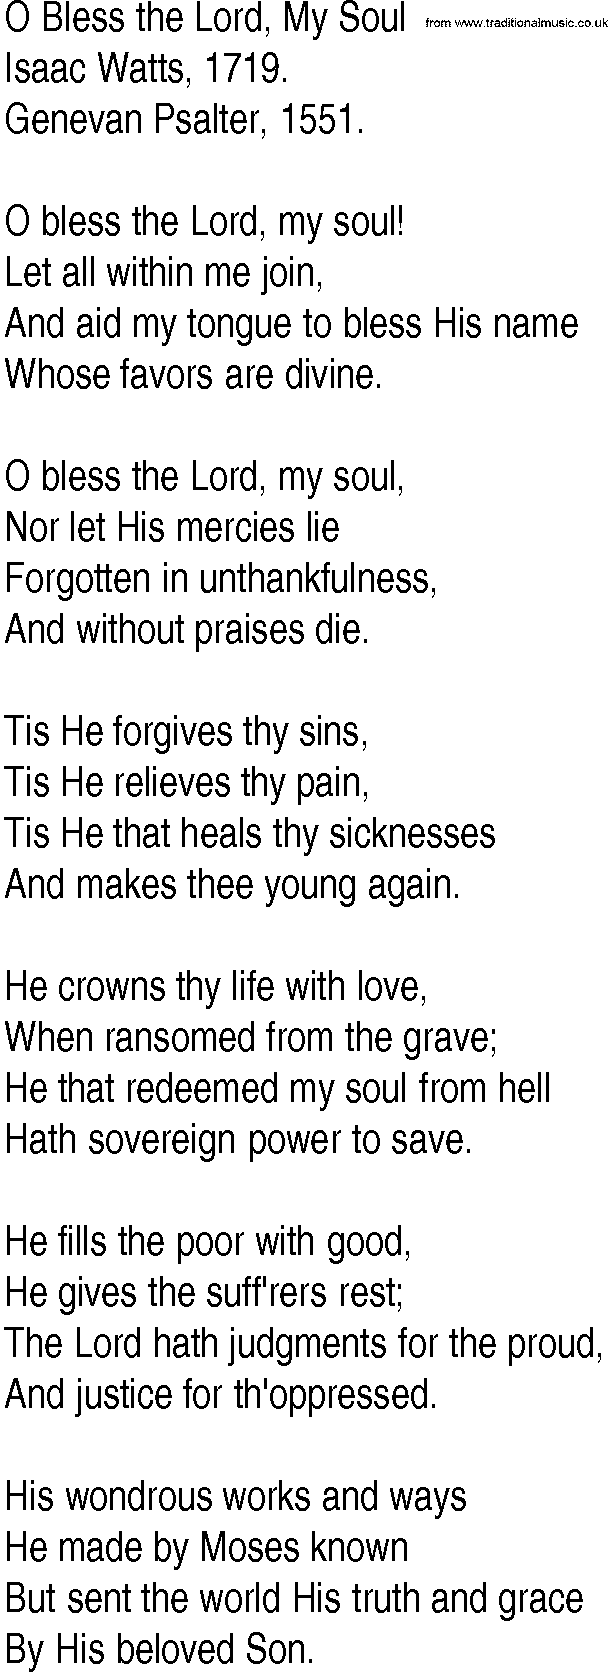 Hymn and Gospel Song: O Bless the Lord, My Soul by Isaac Watts lyrics